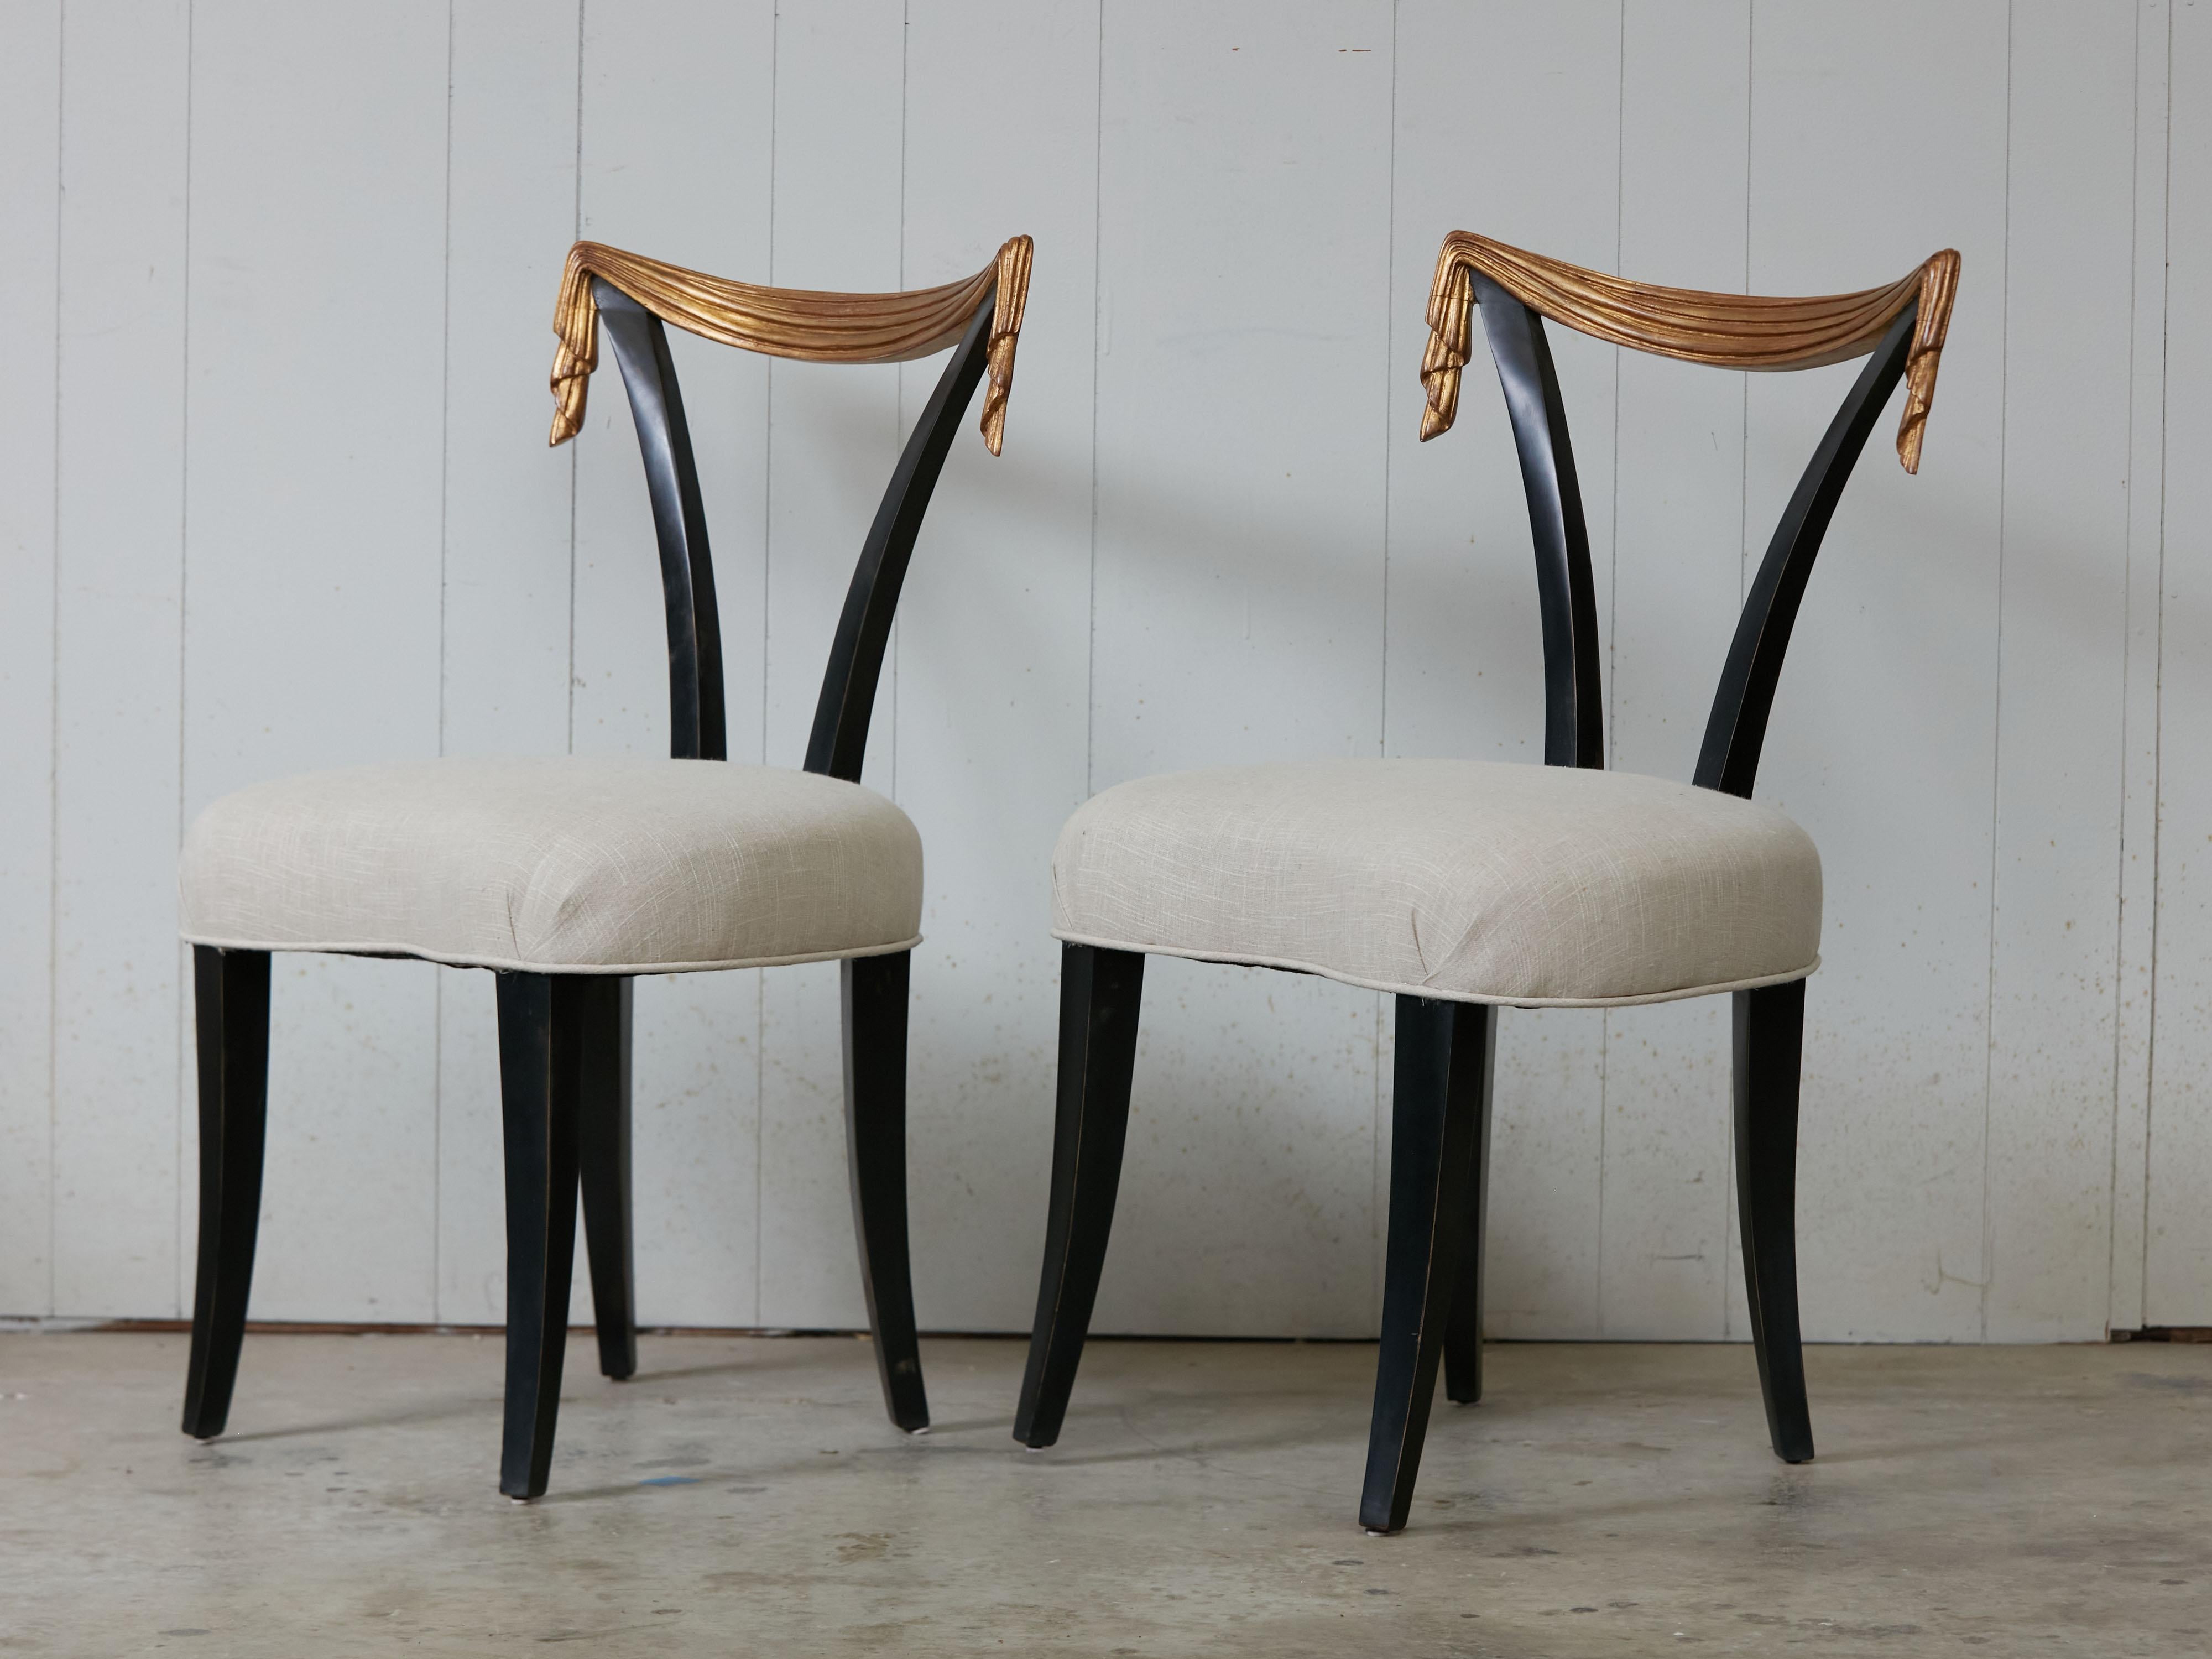 Pair of Midcentury Dorothy Draper Style Hollywood Regency Black and Gold Chairs For Sale 3